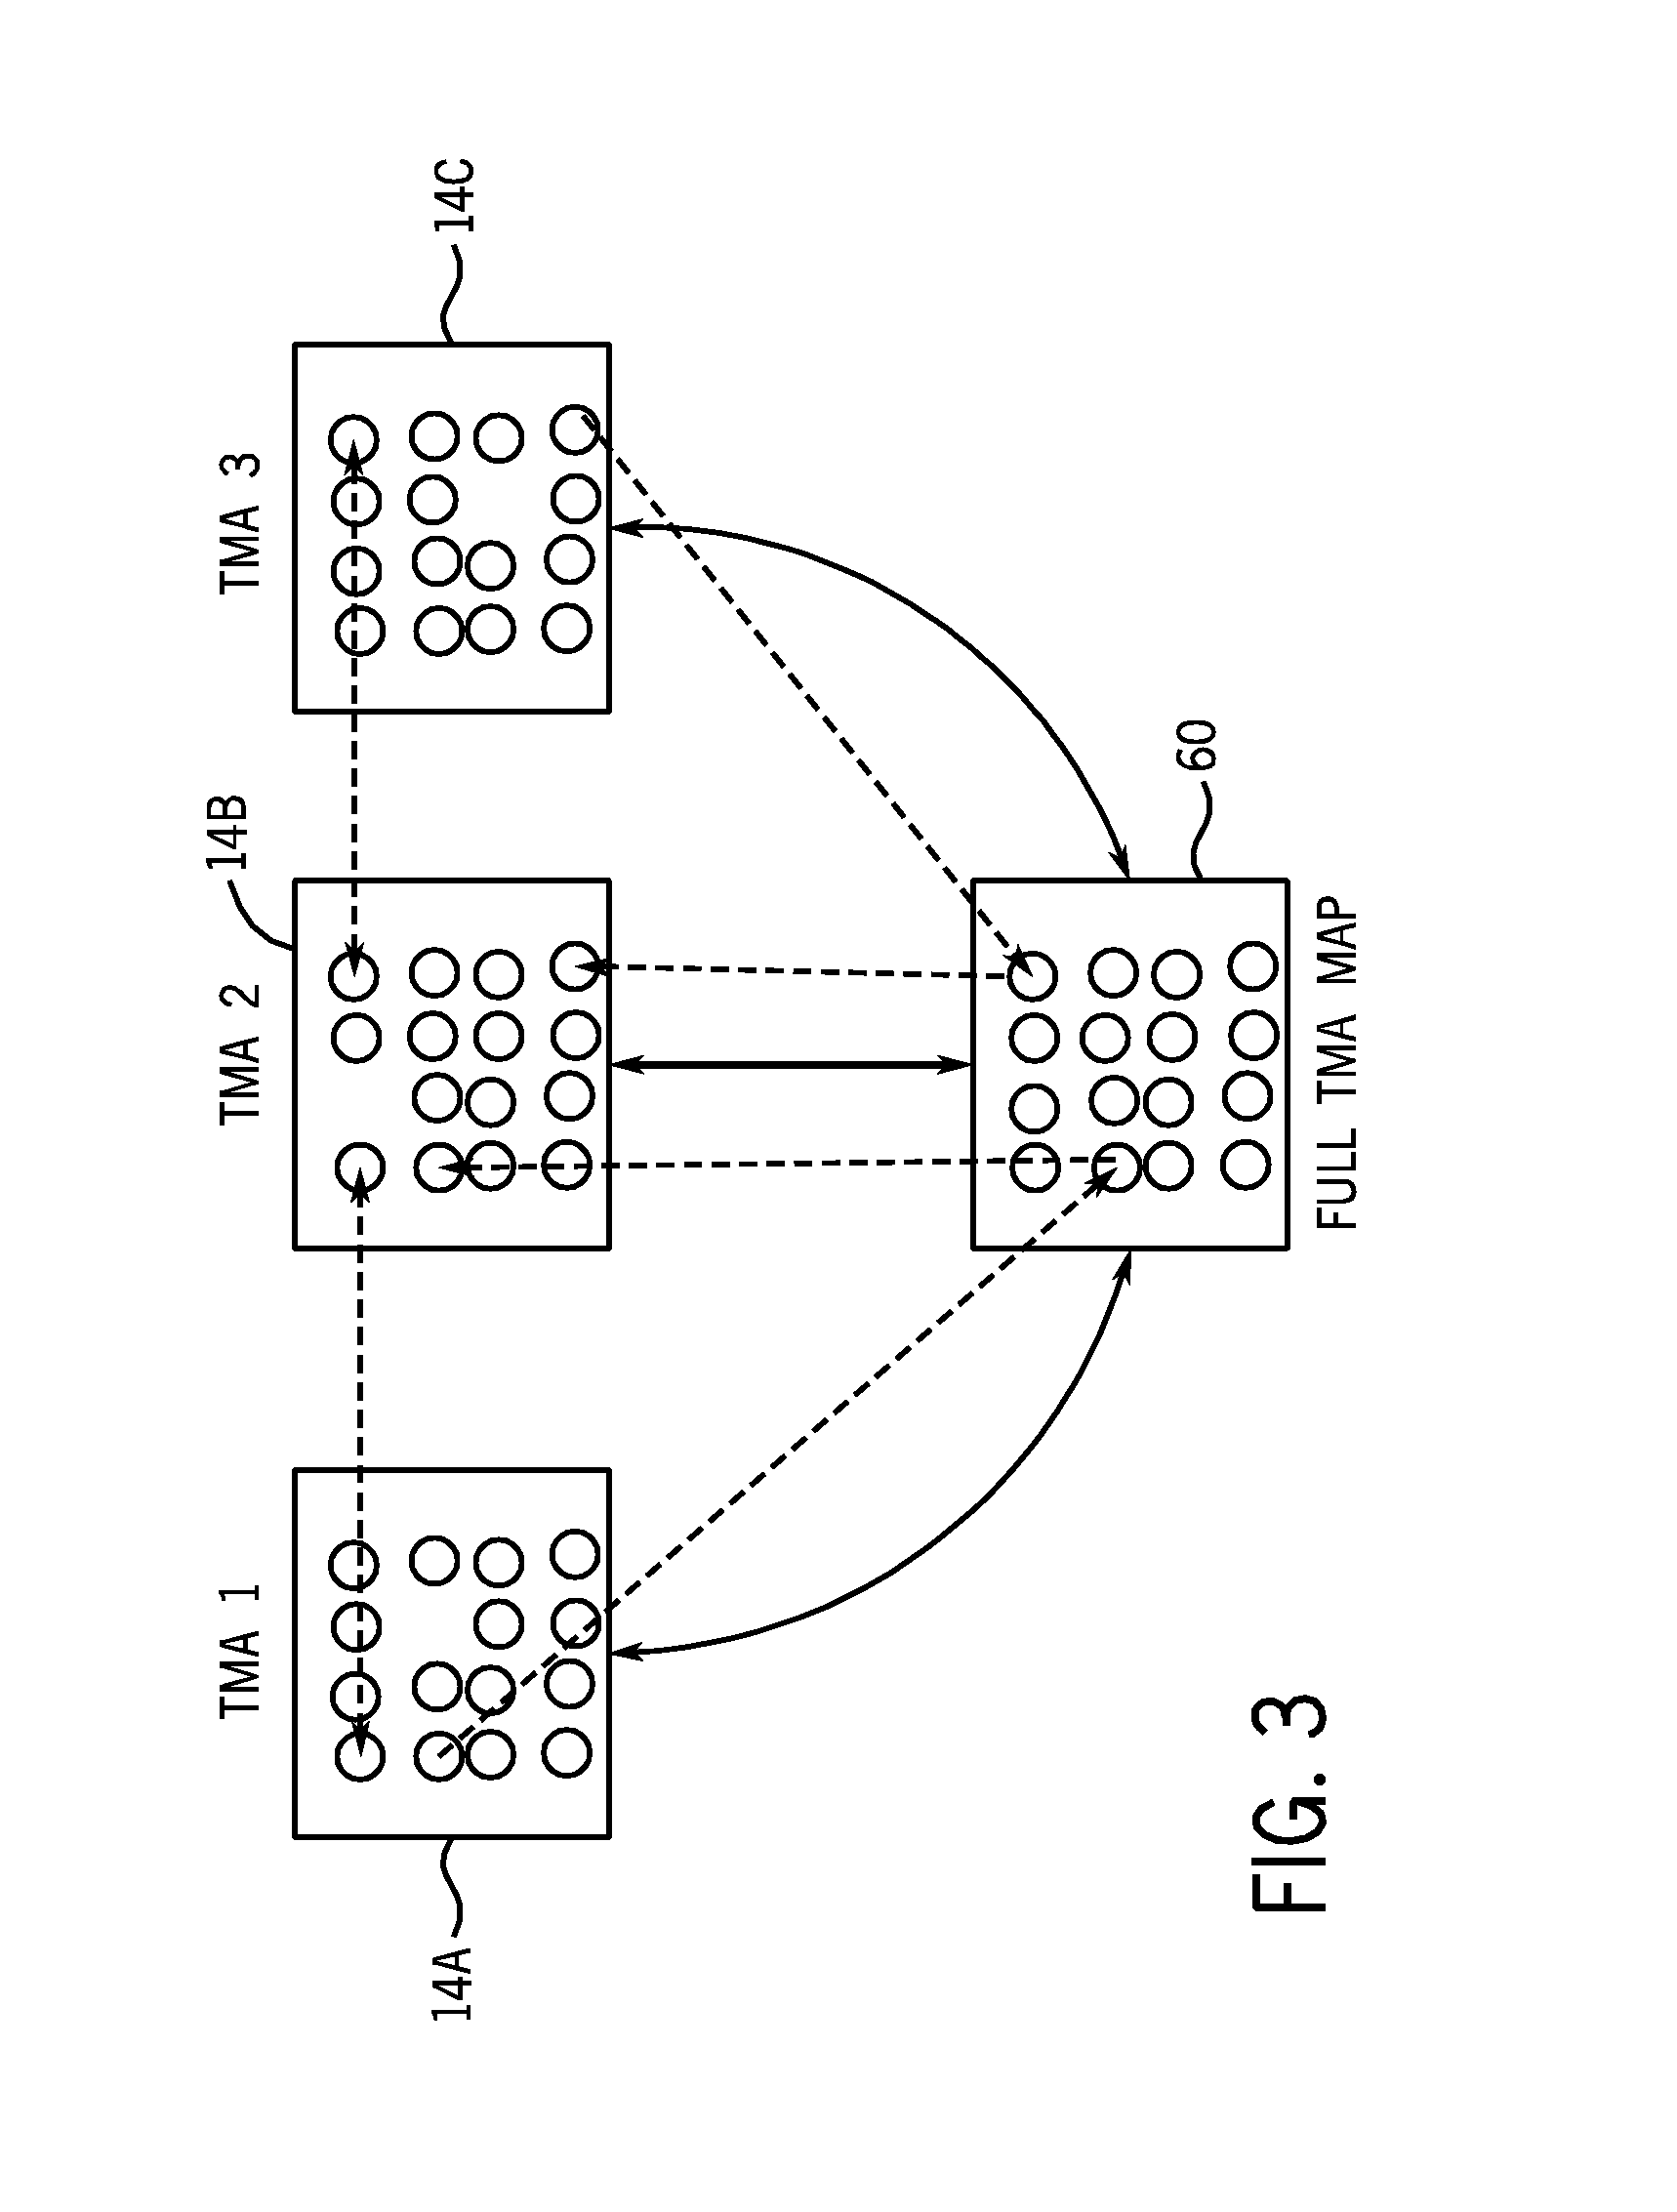 Method and apparatus for analysis of tissue microarrays